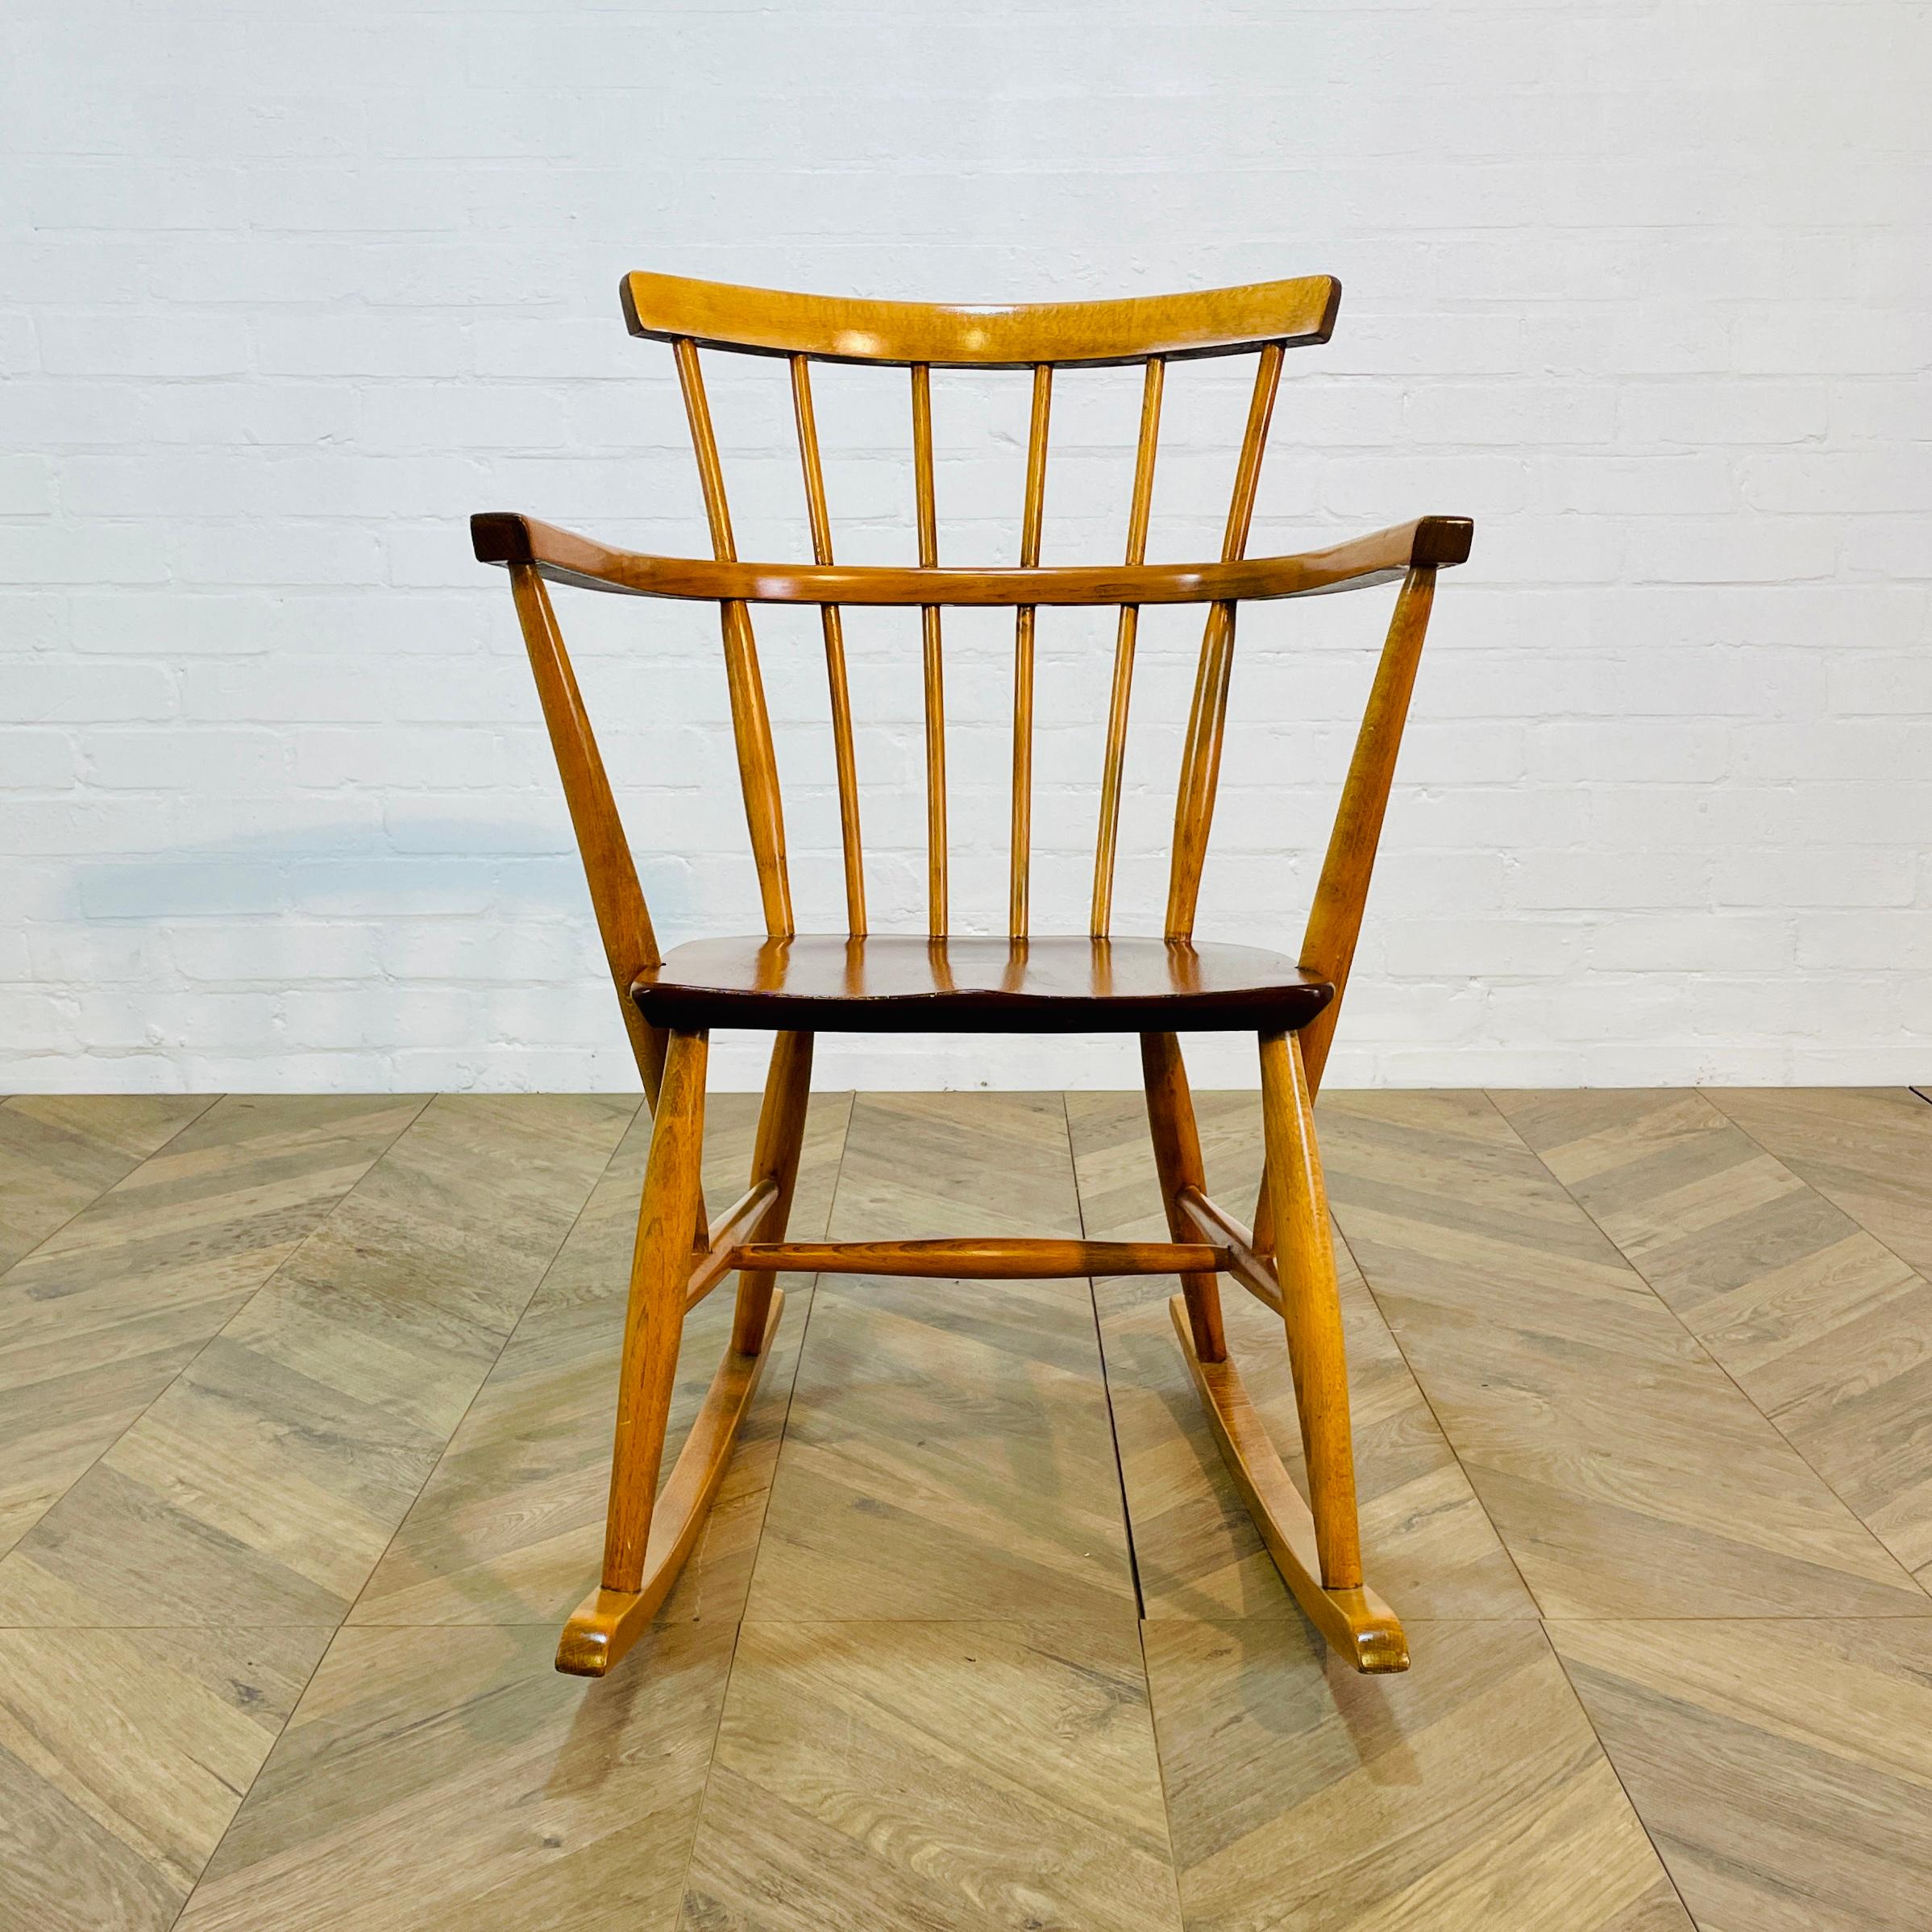 Beautifully Well Proportioned Spindle Back Rocking Chair, circa 1960s.

The chair, made from beech and elm, is solid in its construction and in good condition overall, with only age related scuffs and marks very much in-keeping with their age and